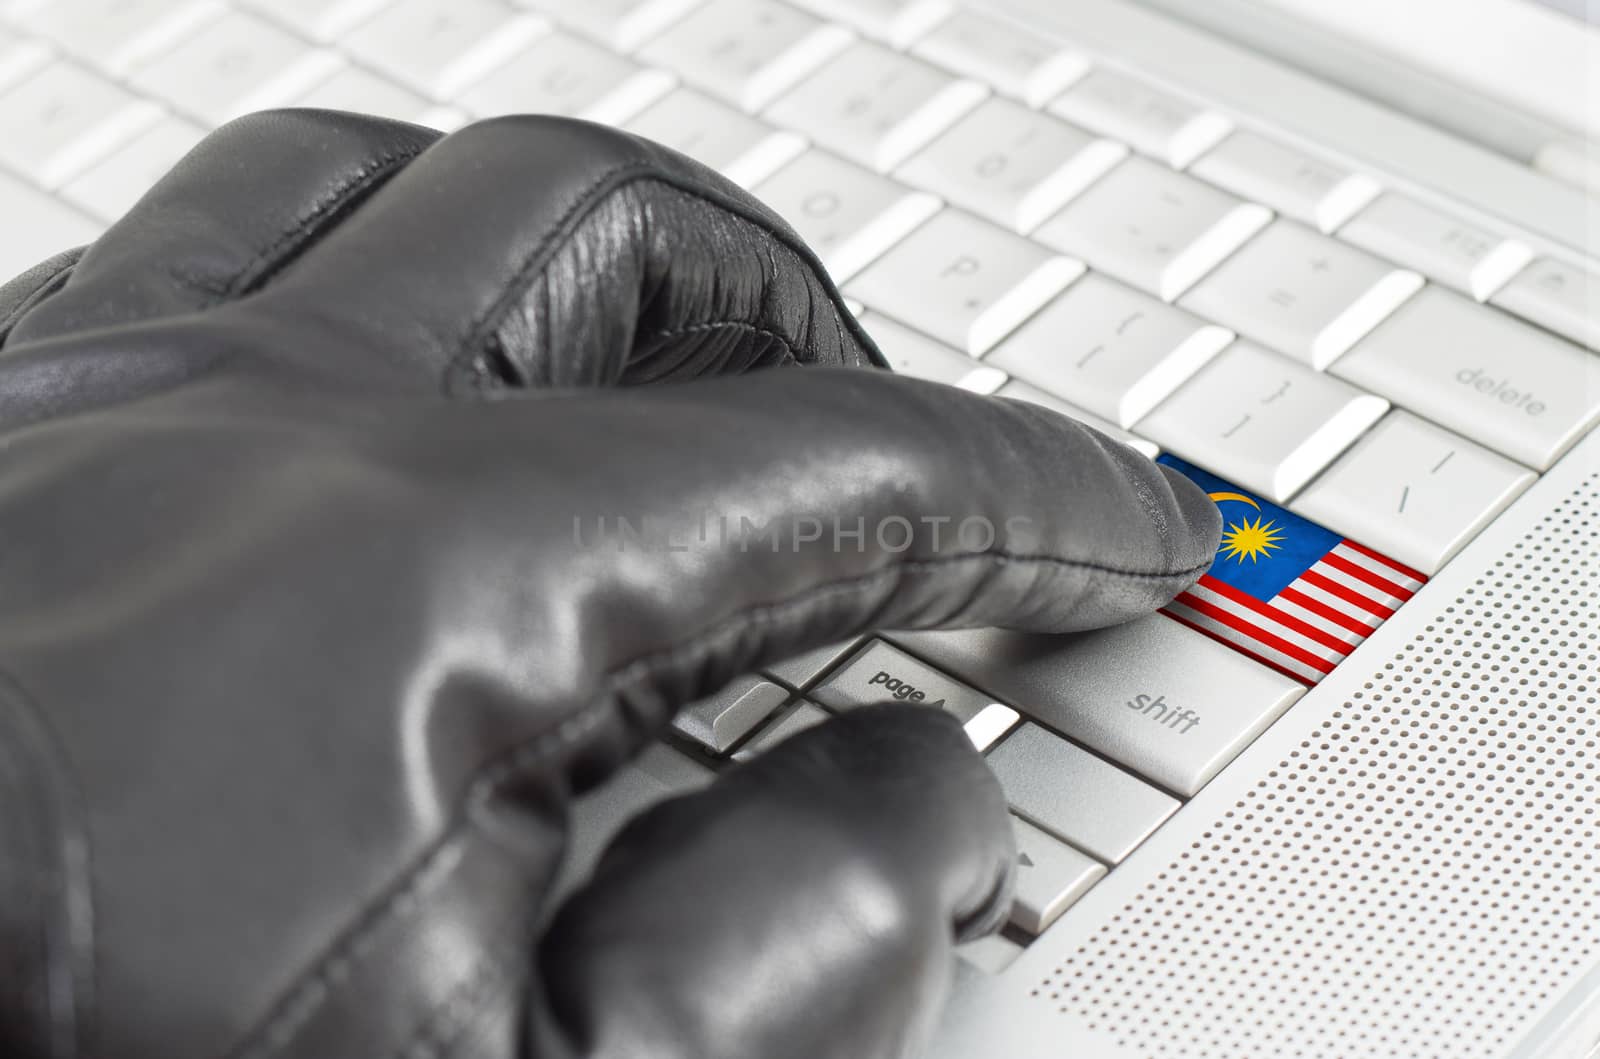 Hacking Malaysia concept with hand wearing black leather glove pressing enter key with flag overlaid